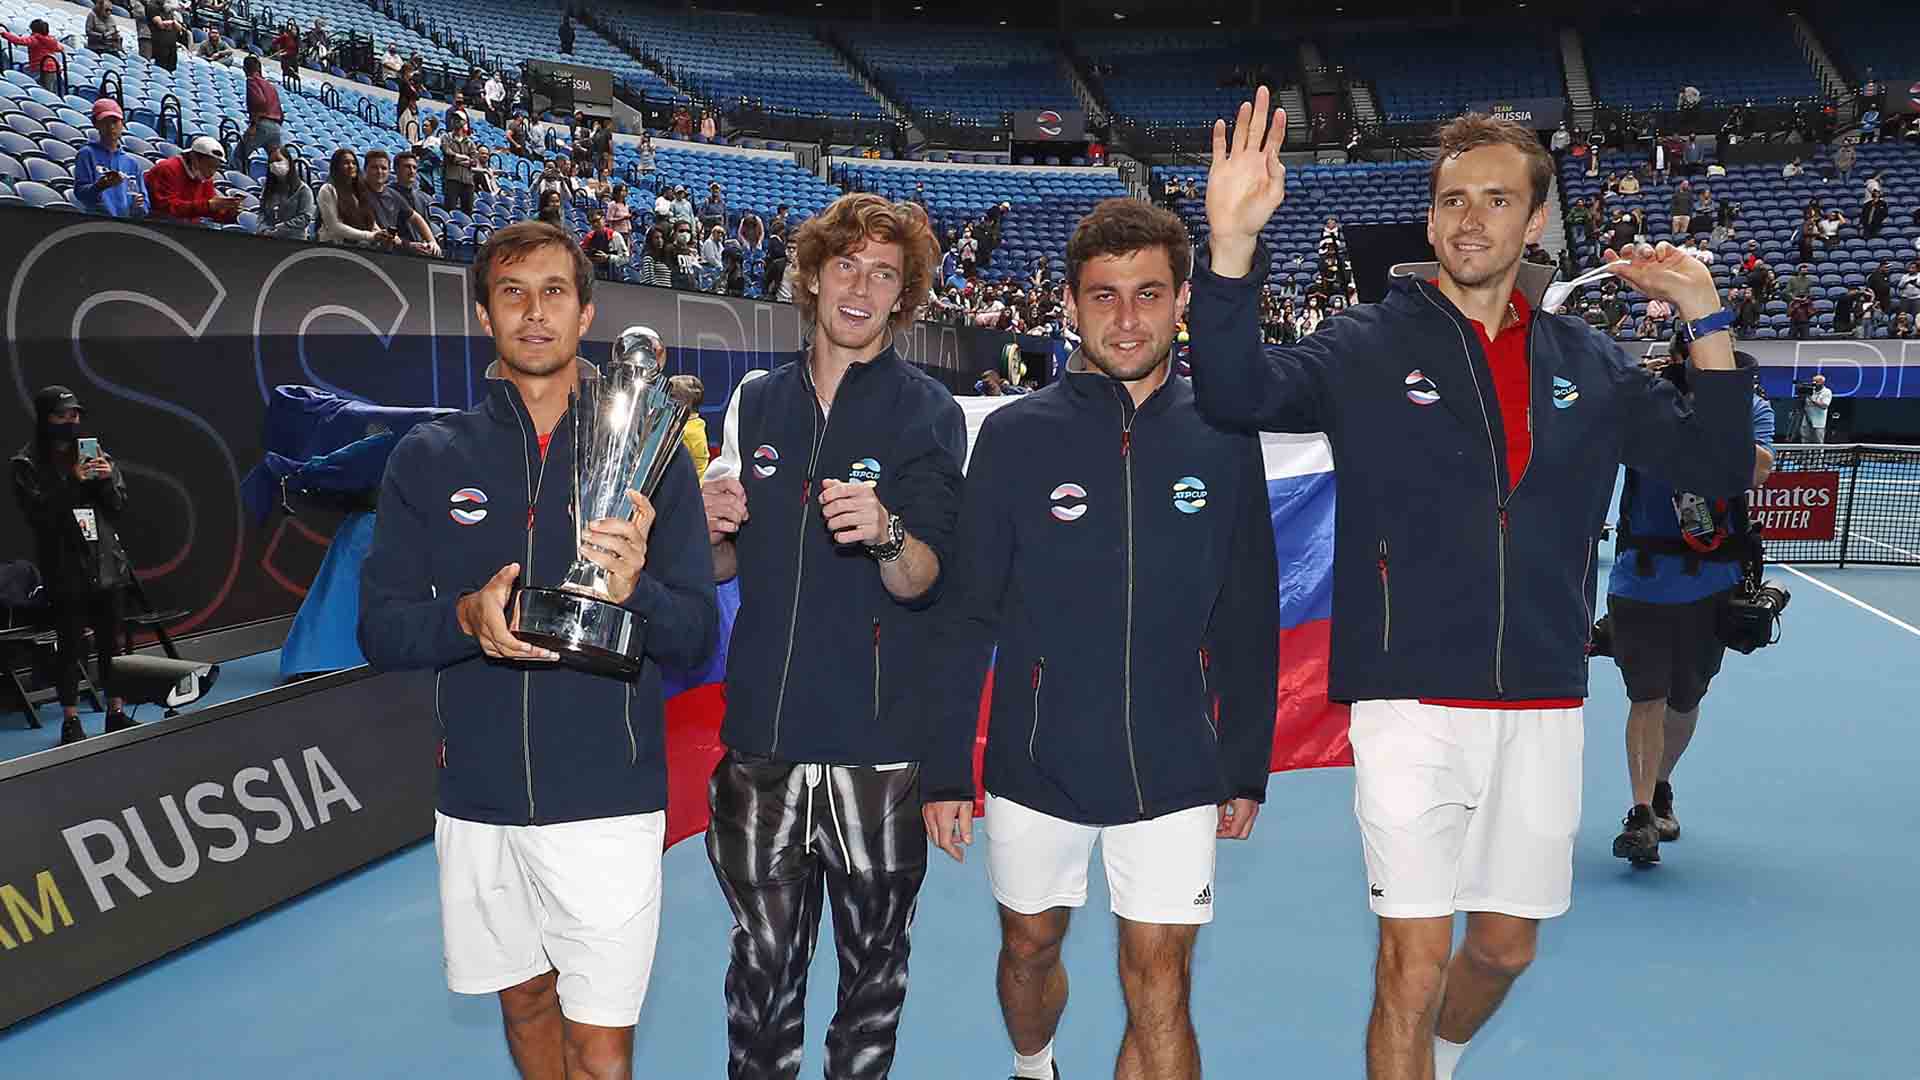 Team Russia at the ATP Cup